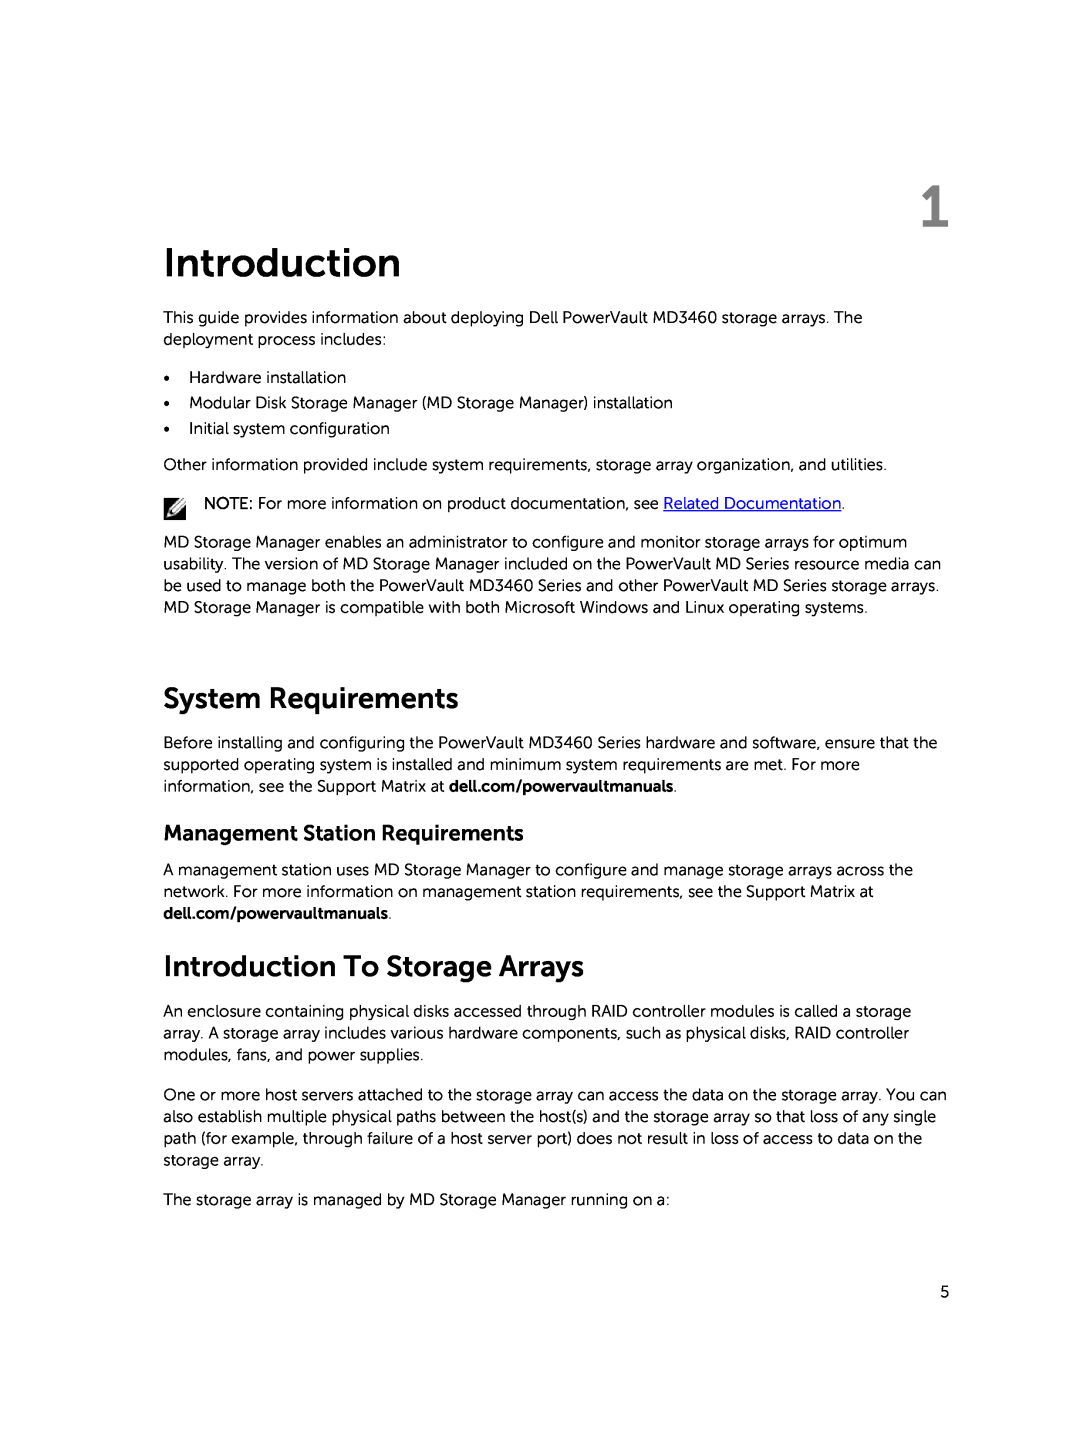 Dell MD3460 manual System Requirements, Introduction To Storage Arrays 